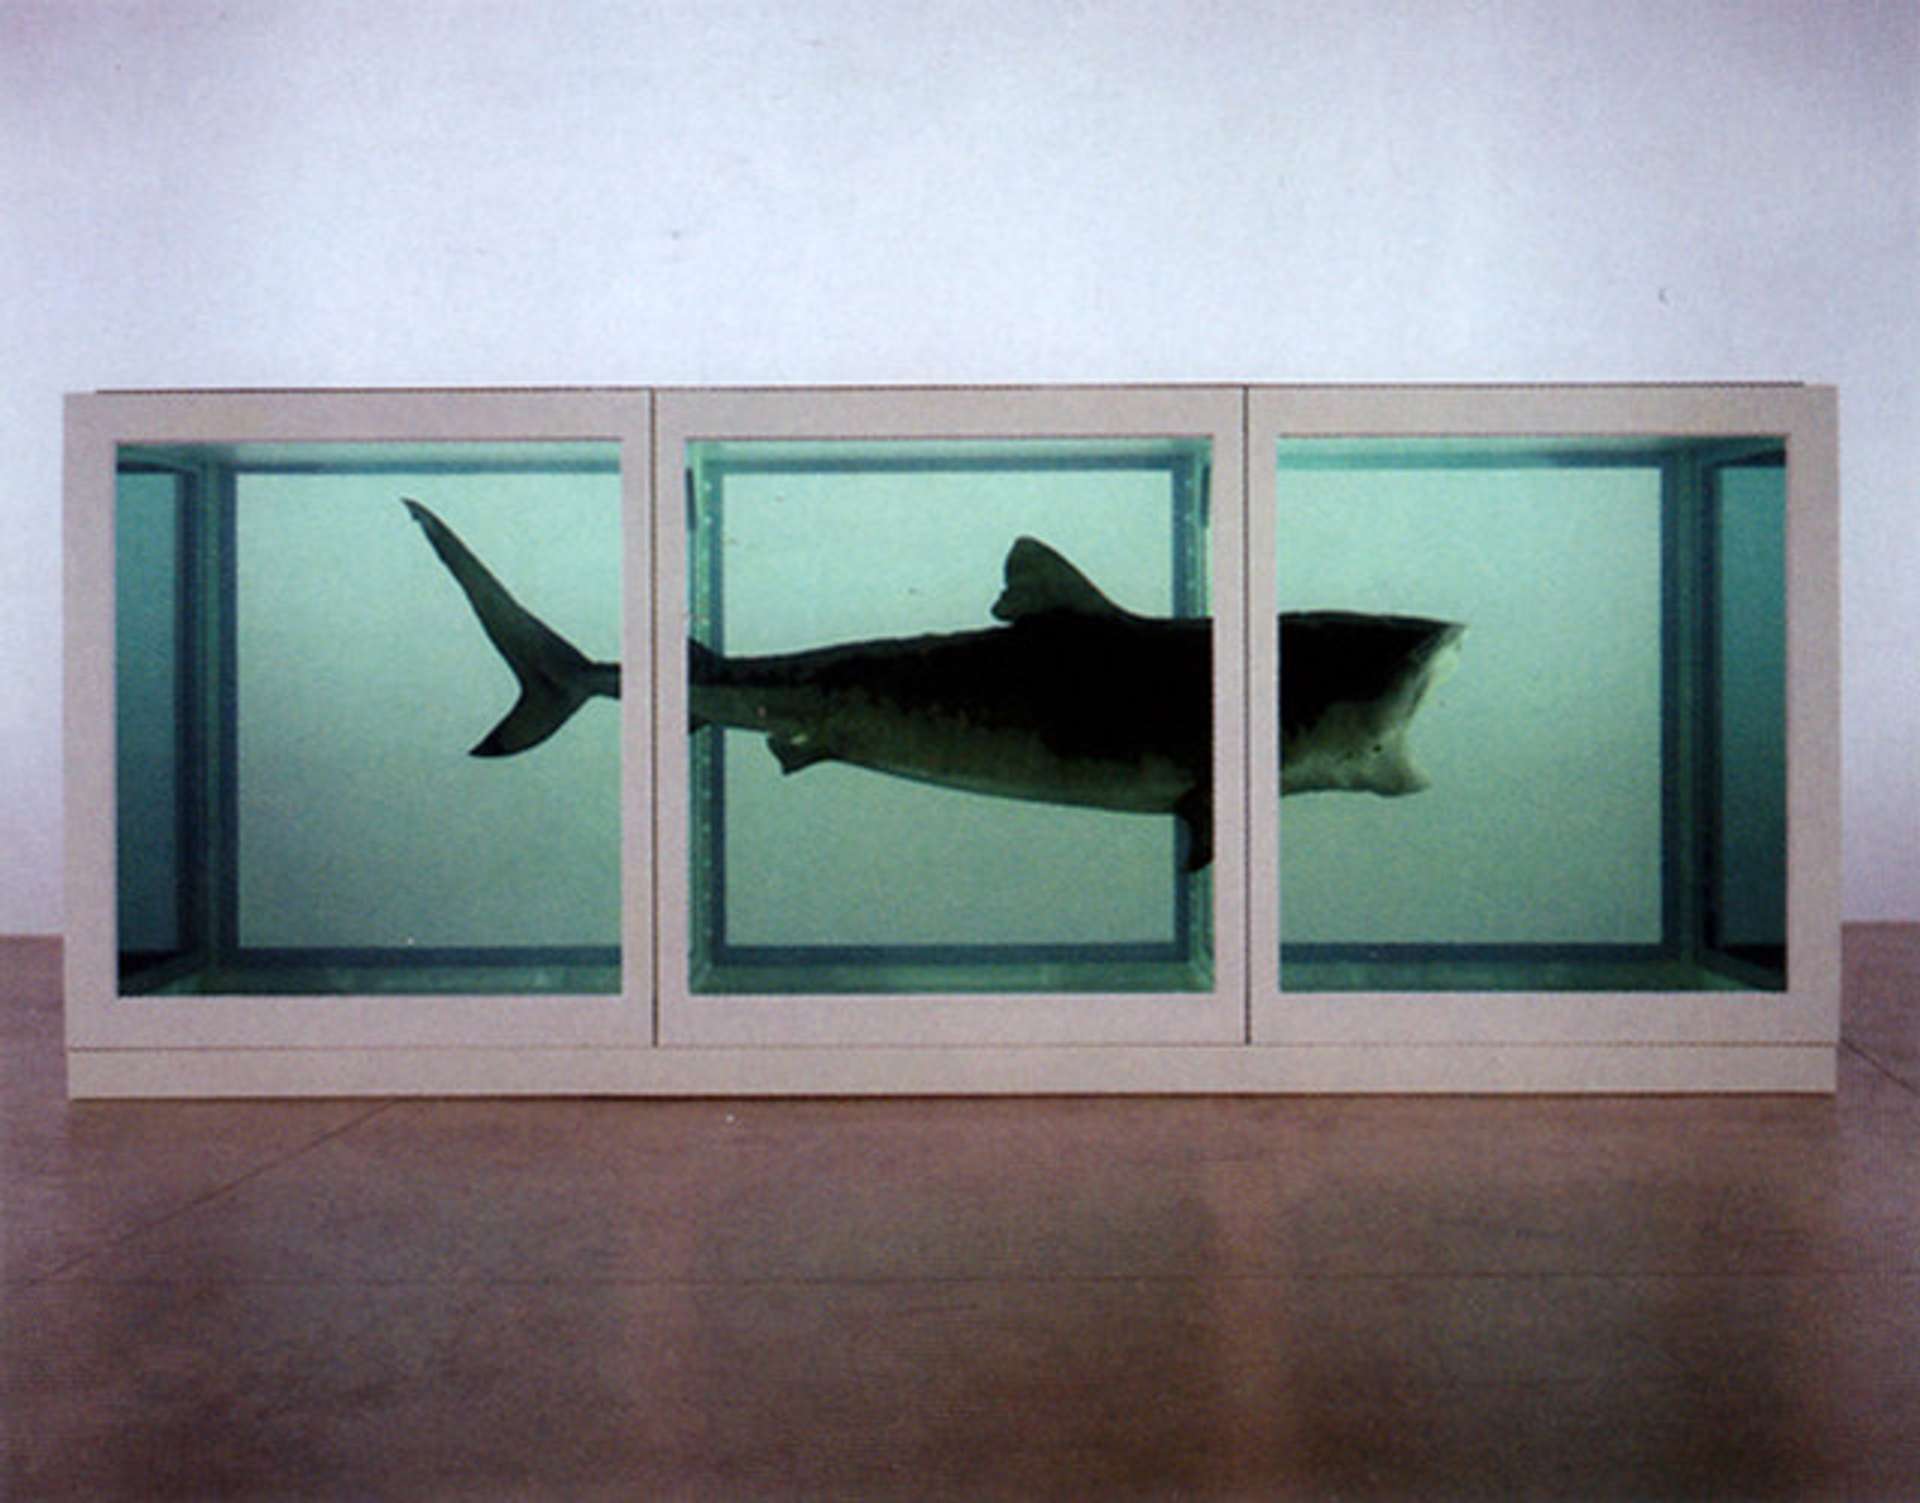 A preserved tiger shark suspended in a glass tank filled with formaldehyde, titled "The Physical Impossibility of Death in the Mind of Someone Living" by Damien Hirst, 1991.